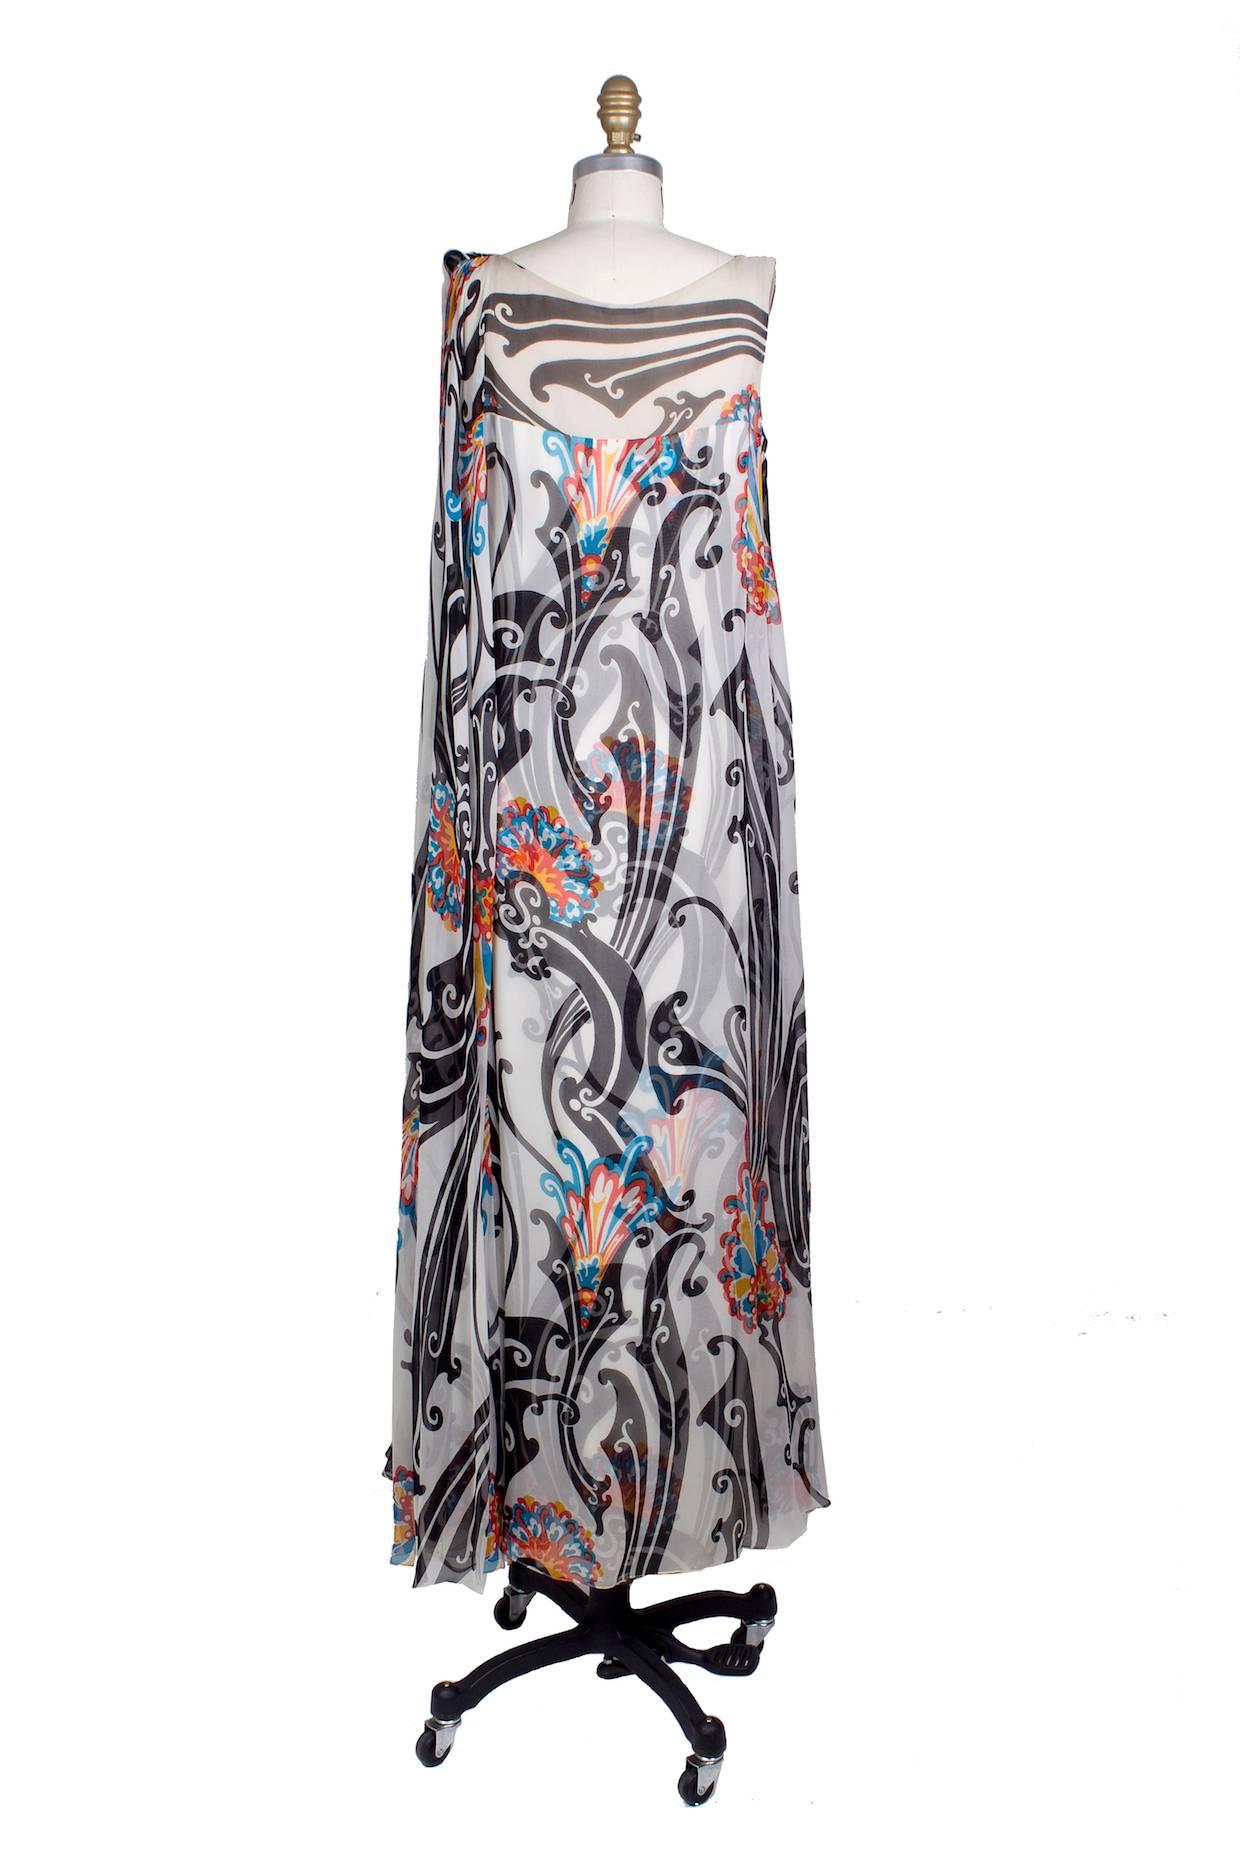 This is a dress with a sleeveless caftan by Malcolm Star c. 1960s.  It features a structured long sheath dress underneath covered by a sheer silk layer on top like a caftan which gathers on the left shoulder to create a drape.  Includes a tag inside